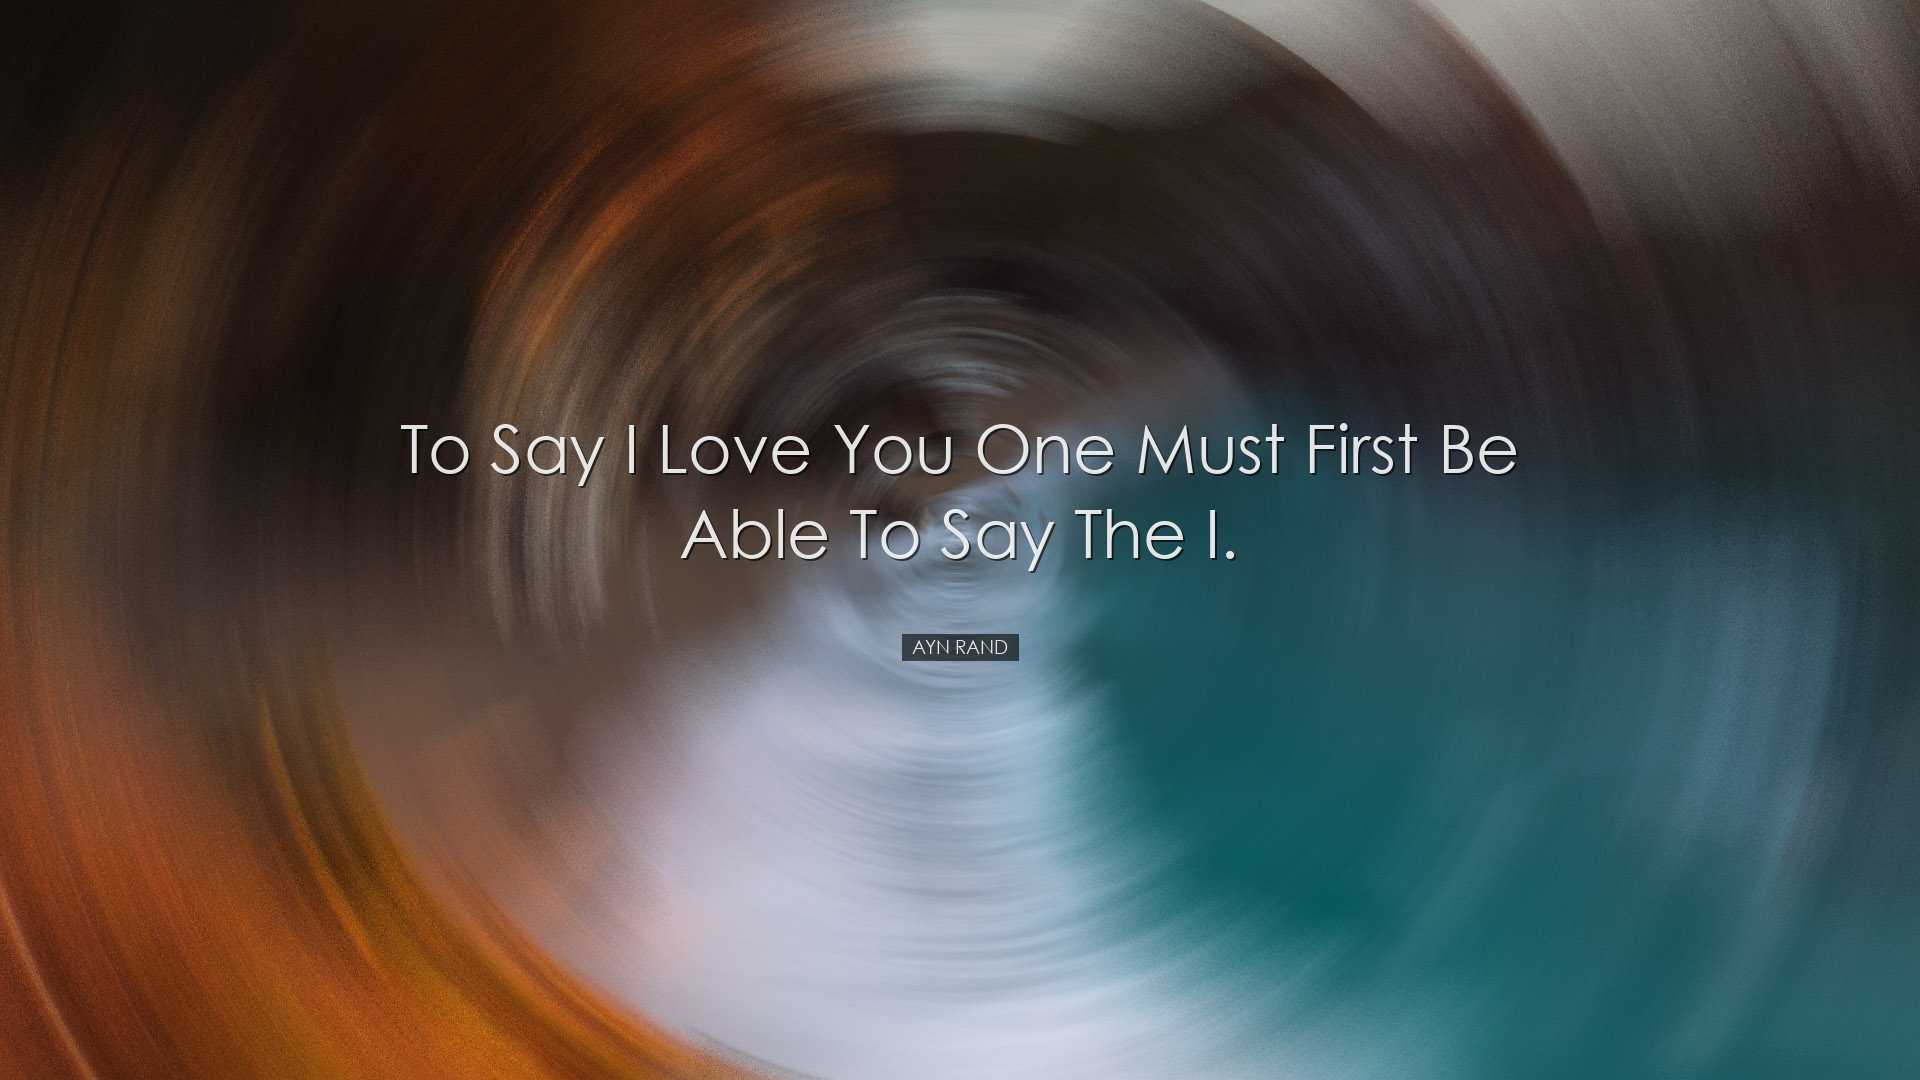 To say I love you one must first be able to say the I. - Ayn Rand